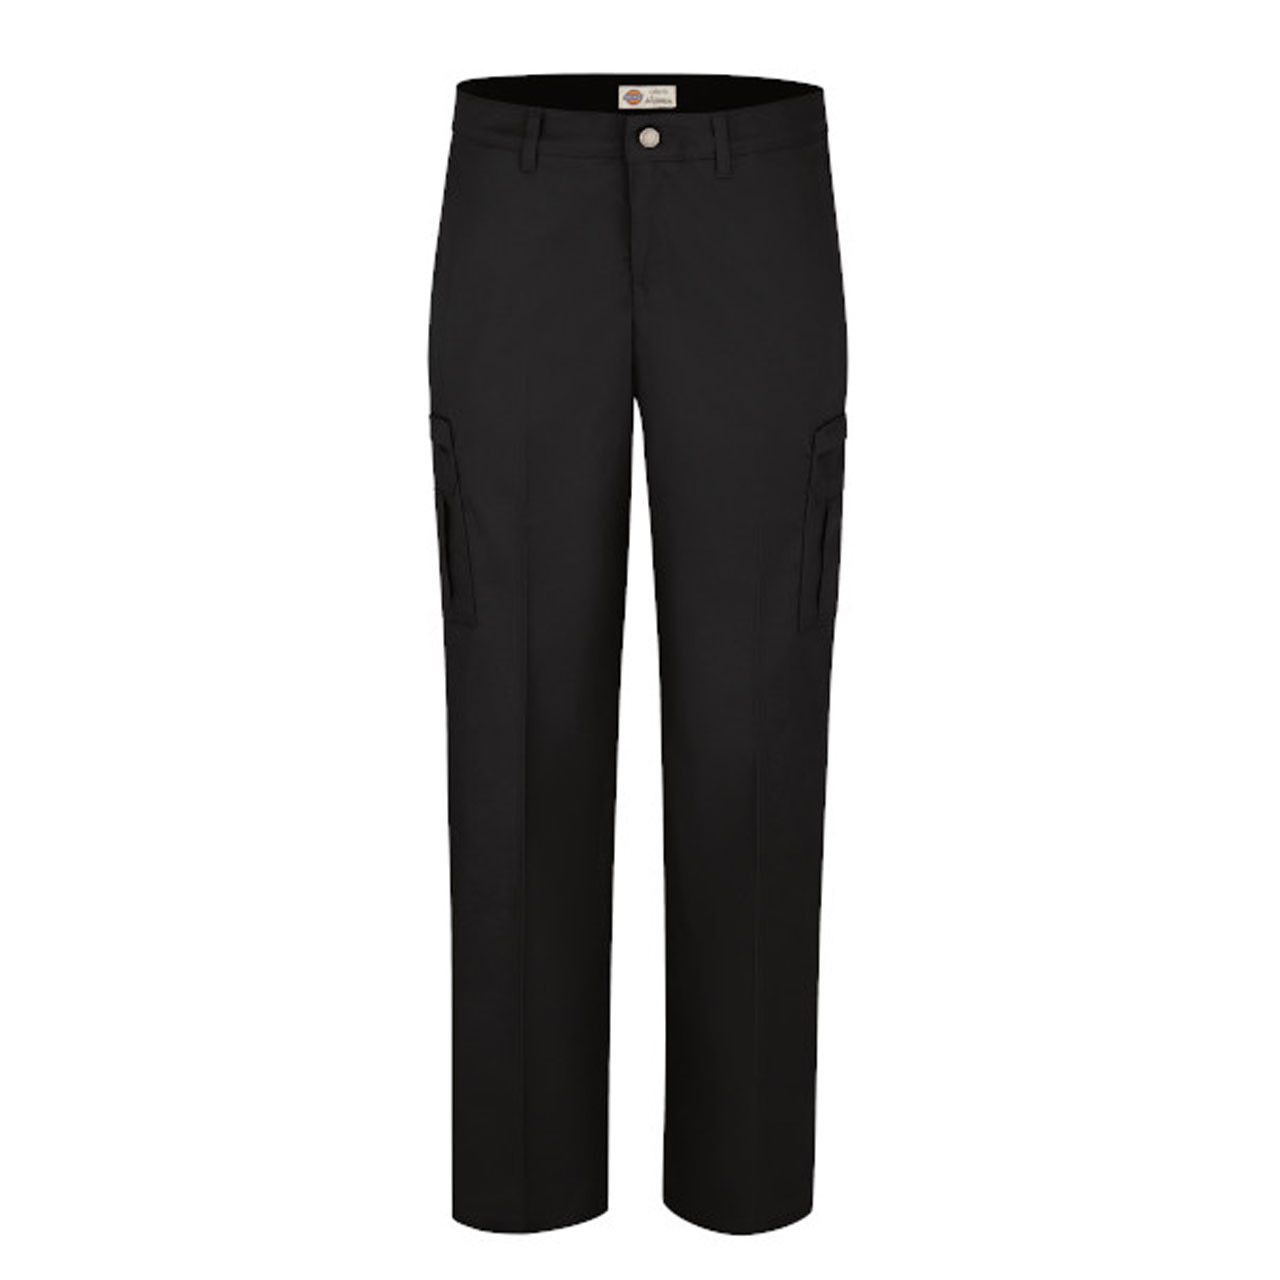 What's the model number for Dickies size chart women's pants in relaxed straight cargo?